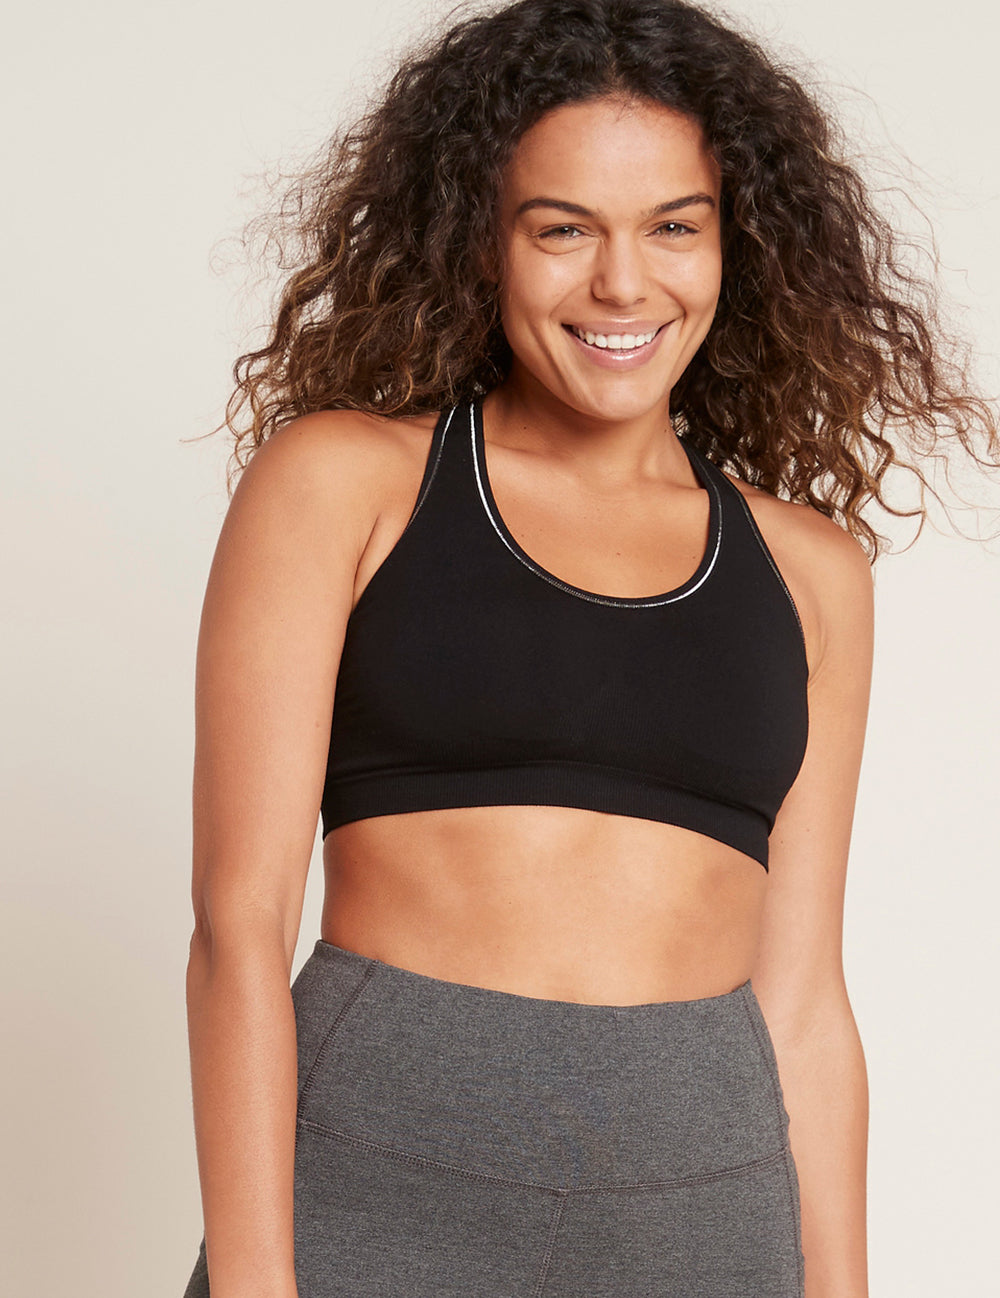 Buy ACTIVE RACER BRA online at Intimo